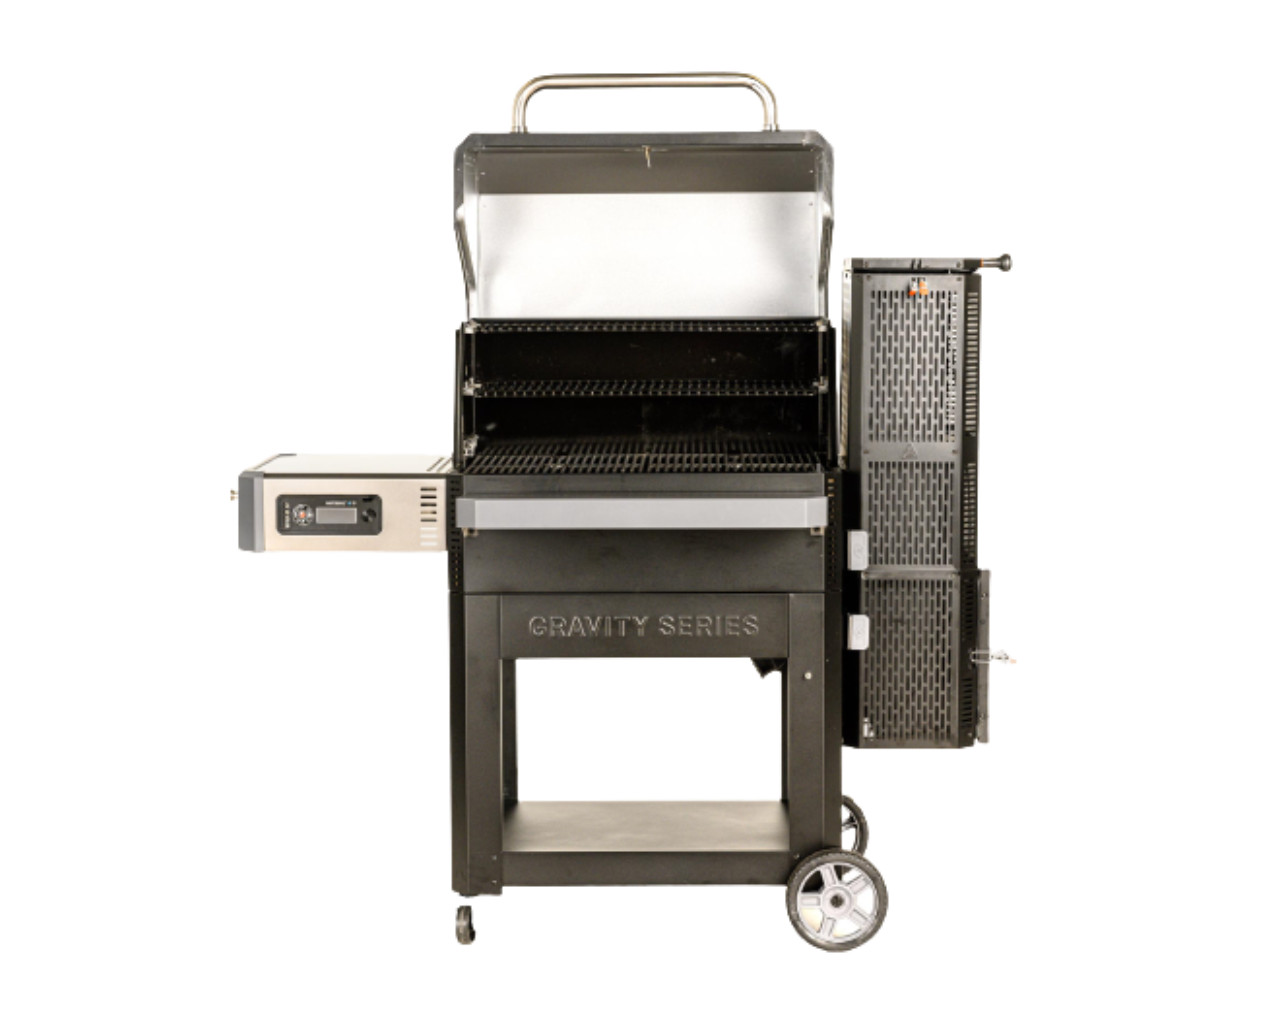 Masterbuilt Gravity Fed 1050 Charcoal Smoker & Grill, , hi-res image number null